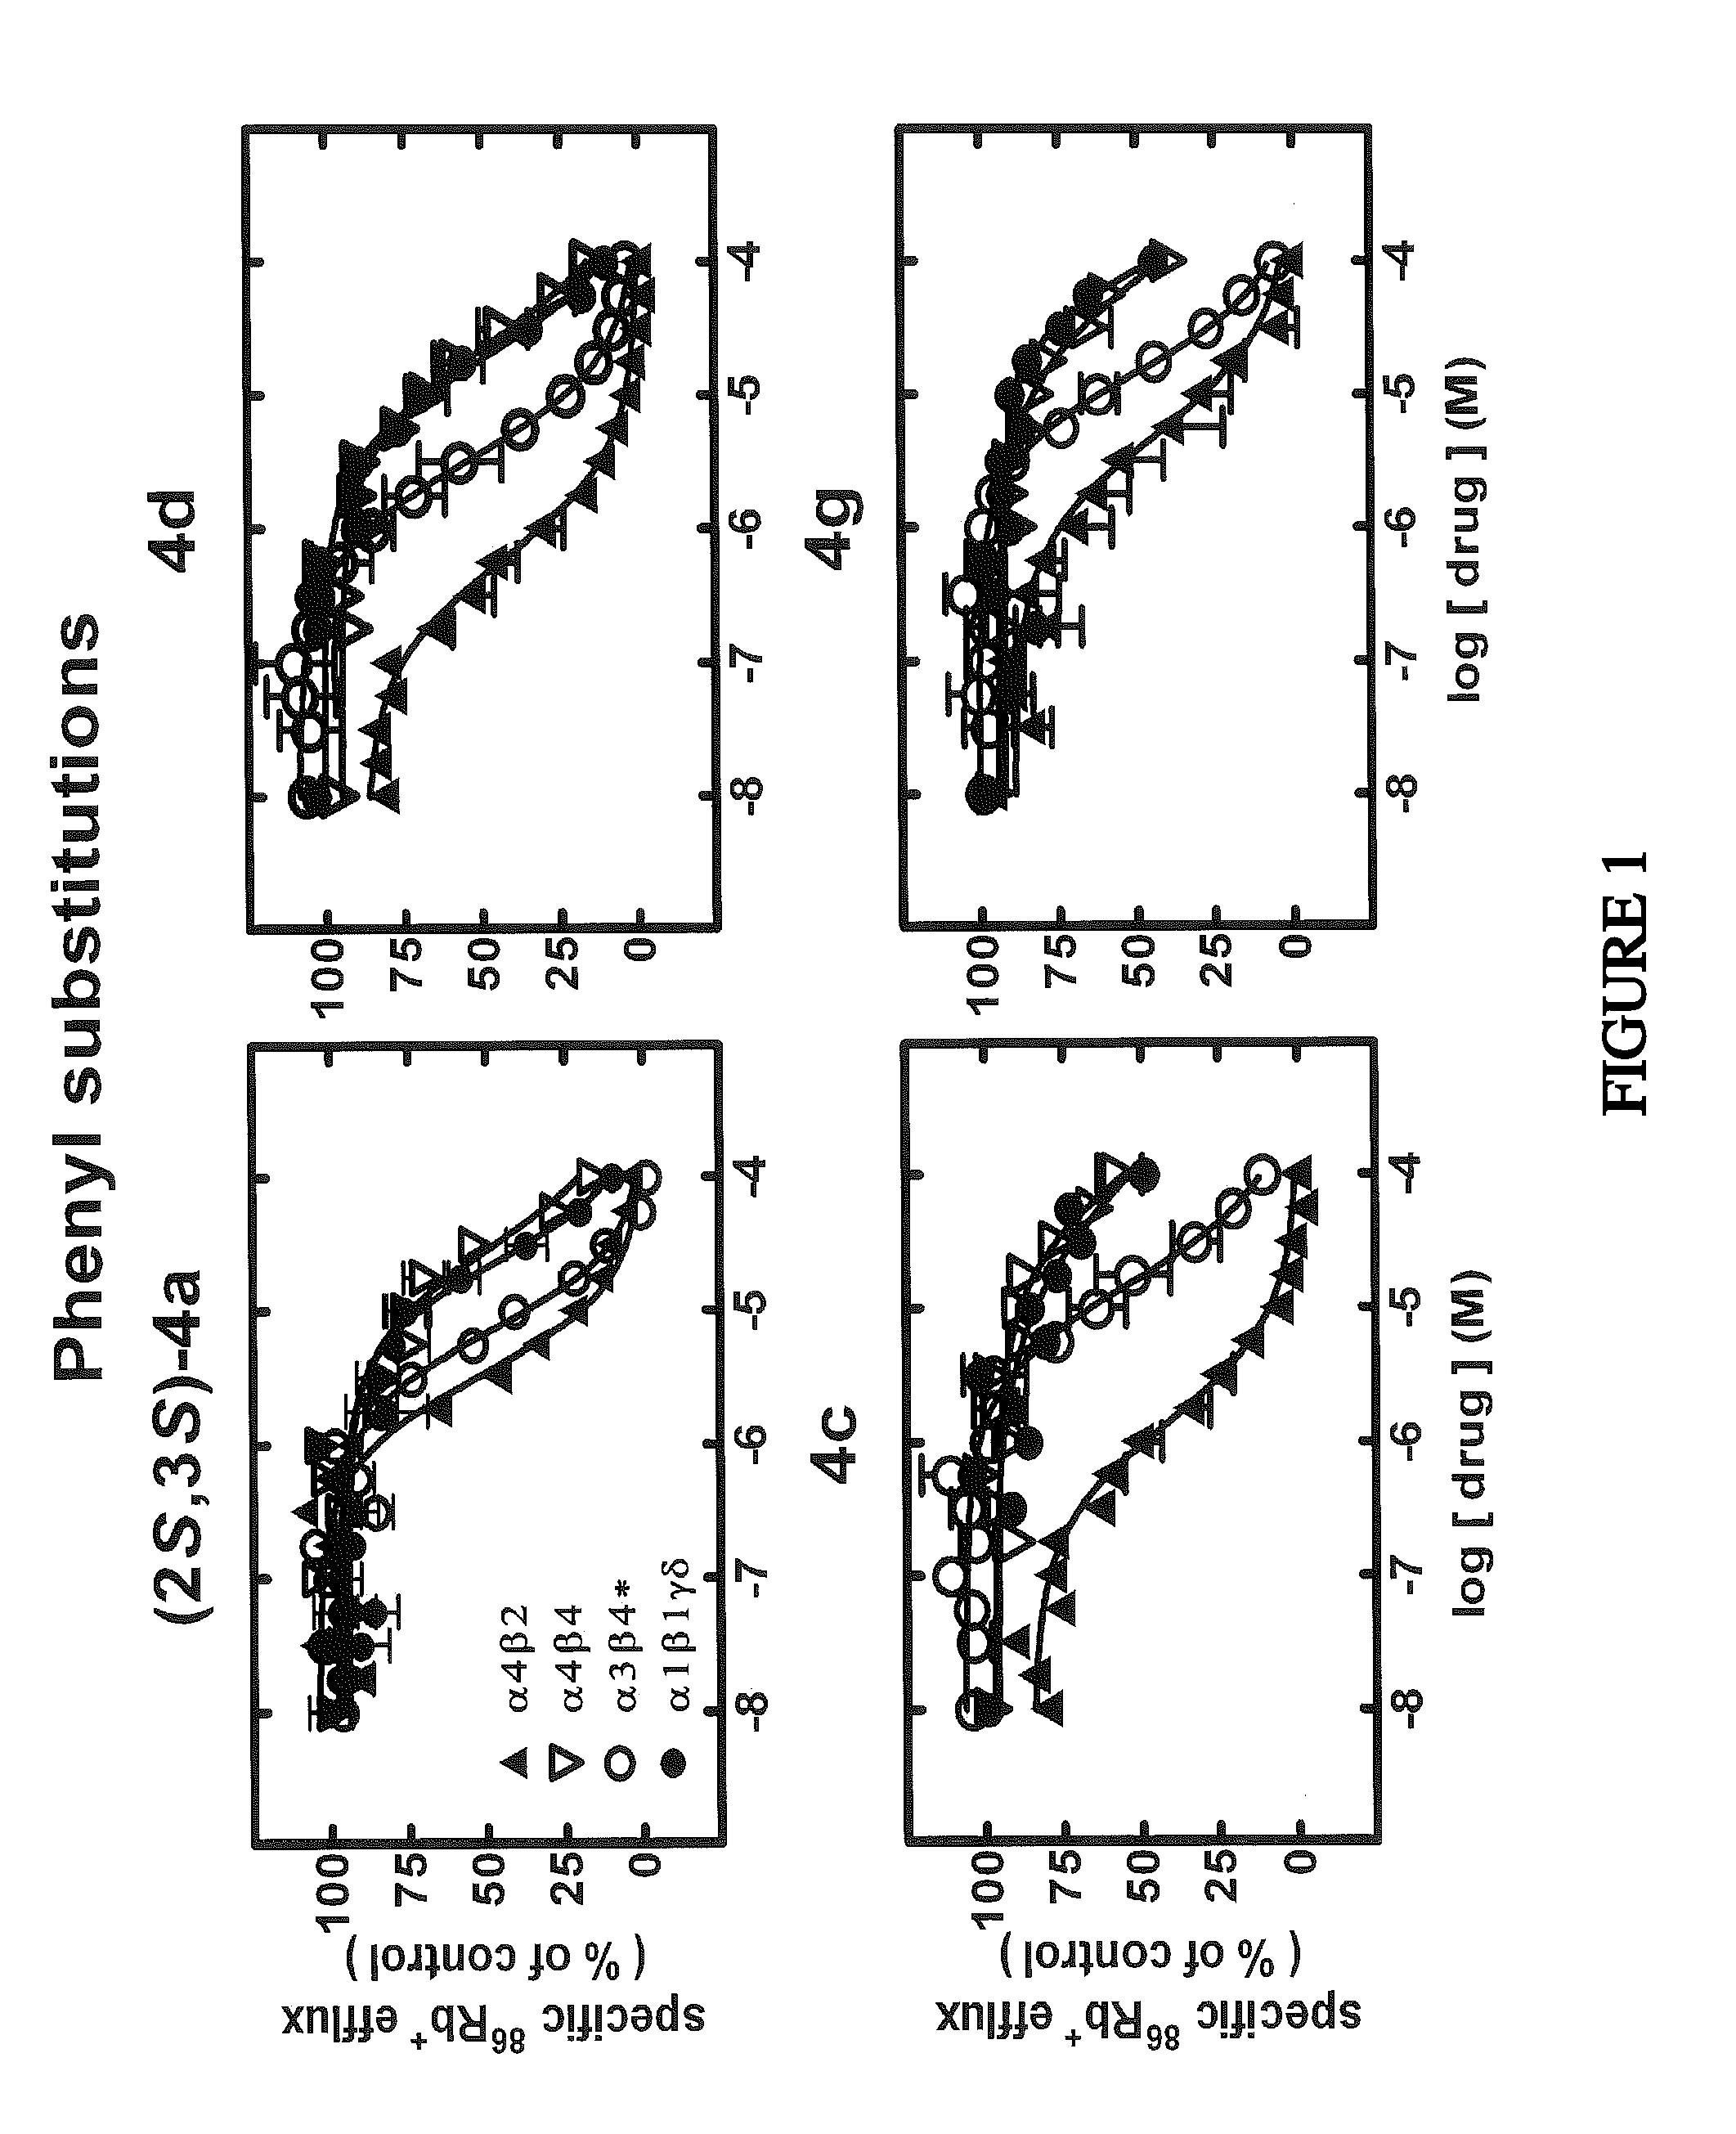 Hydroxybupropion analogues for treating drug dependence